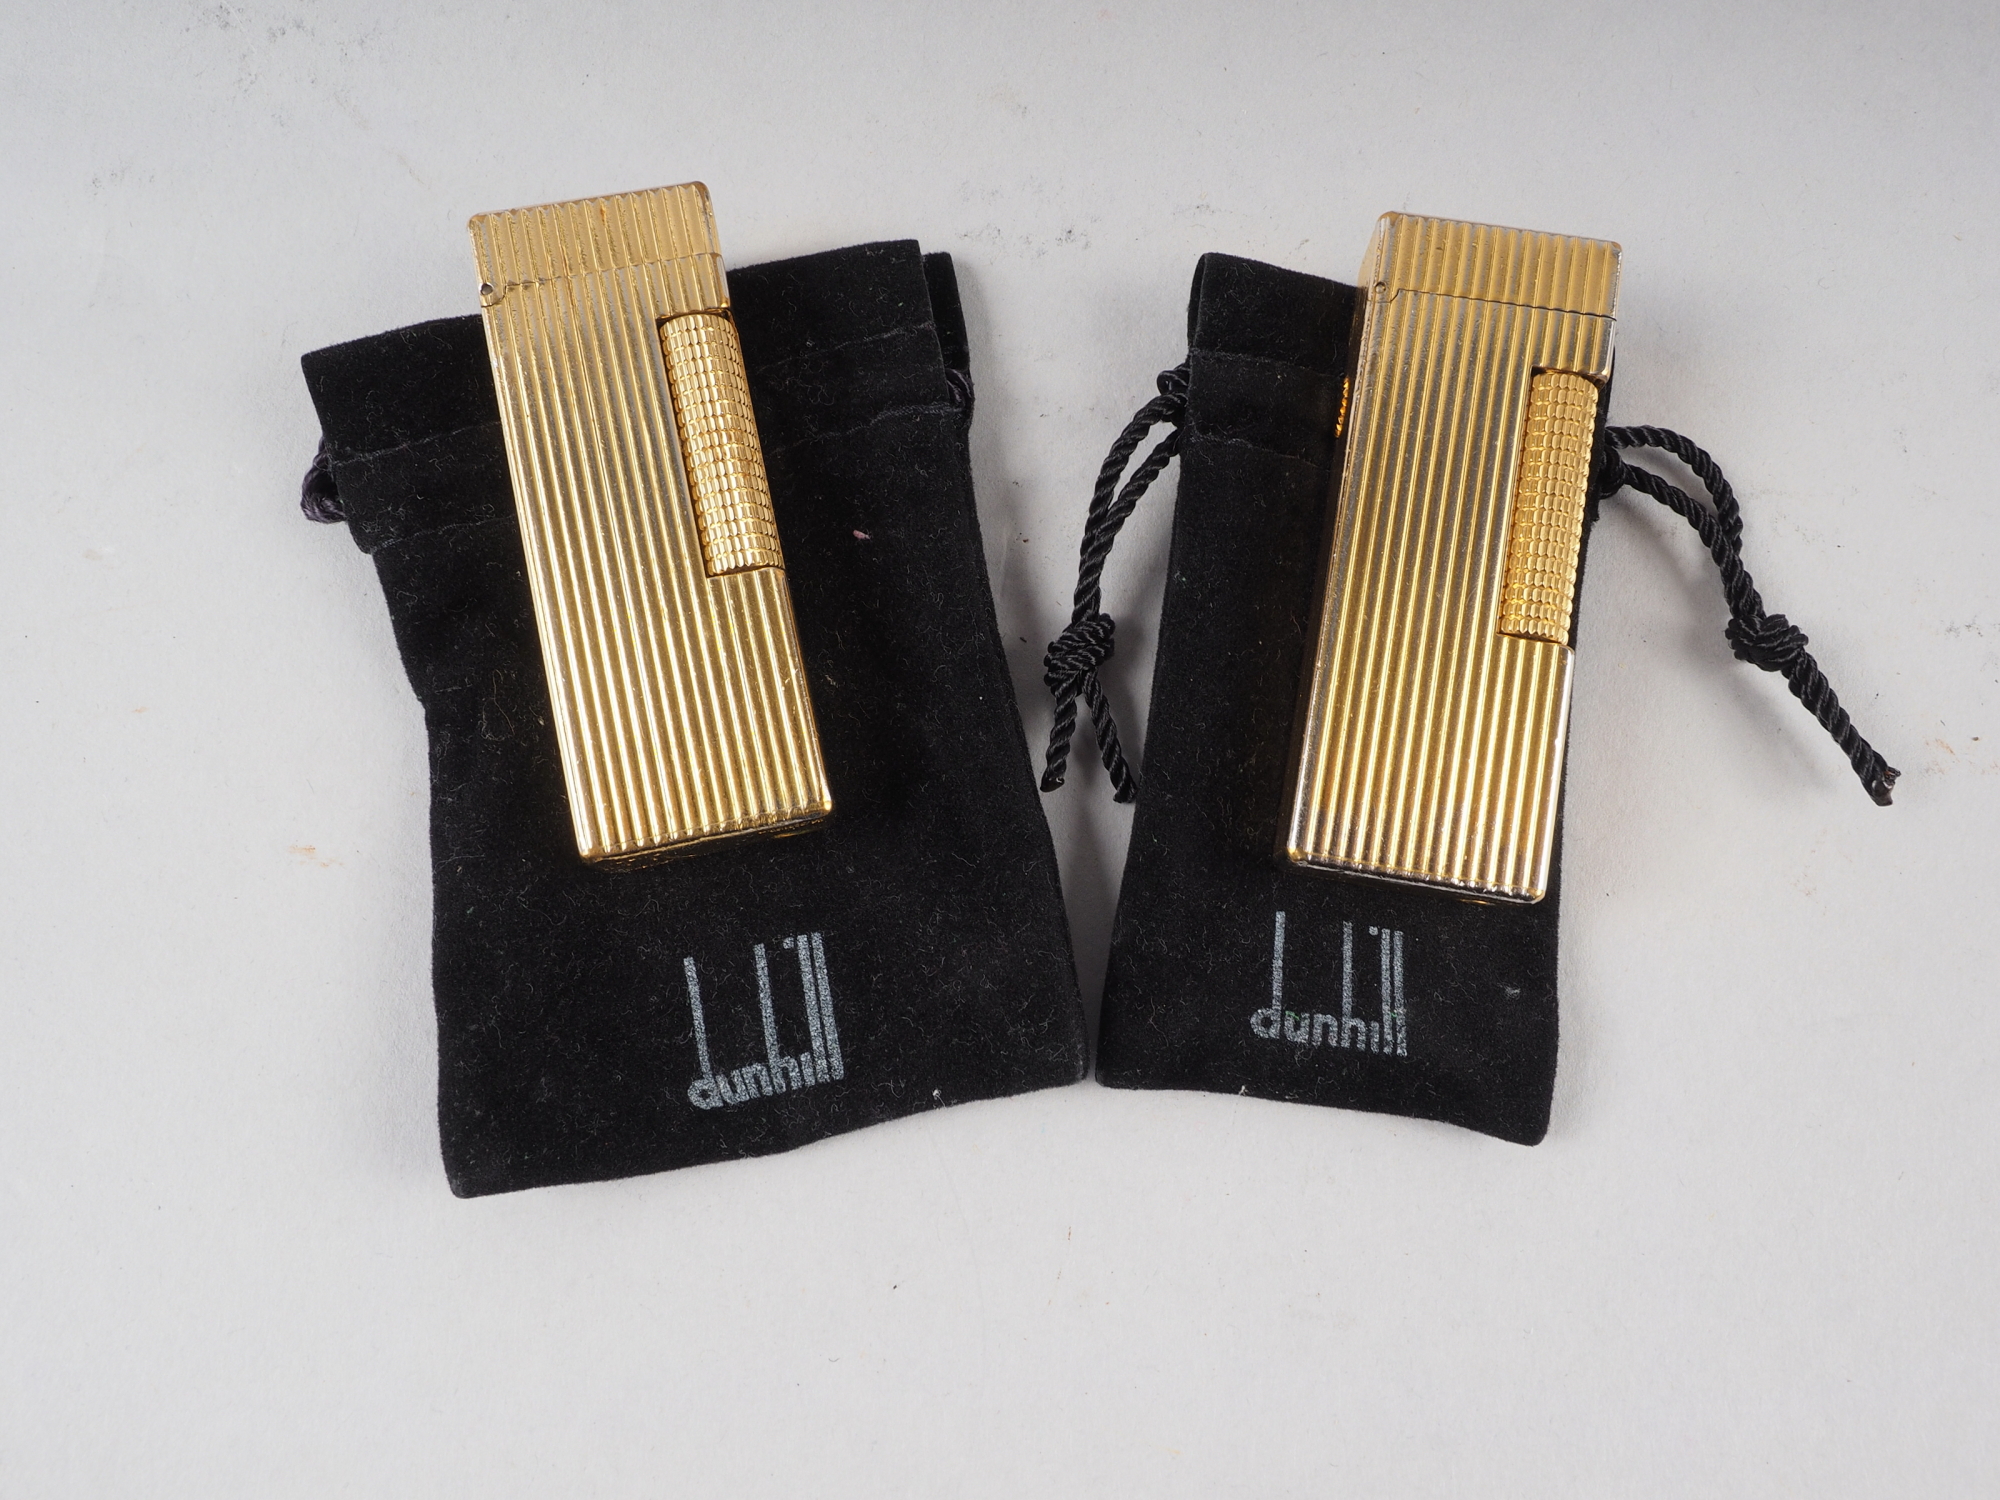 Two gold plated Dunhill butane cigarette lighters with original velvet pouches